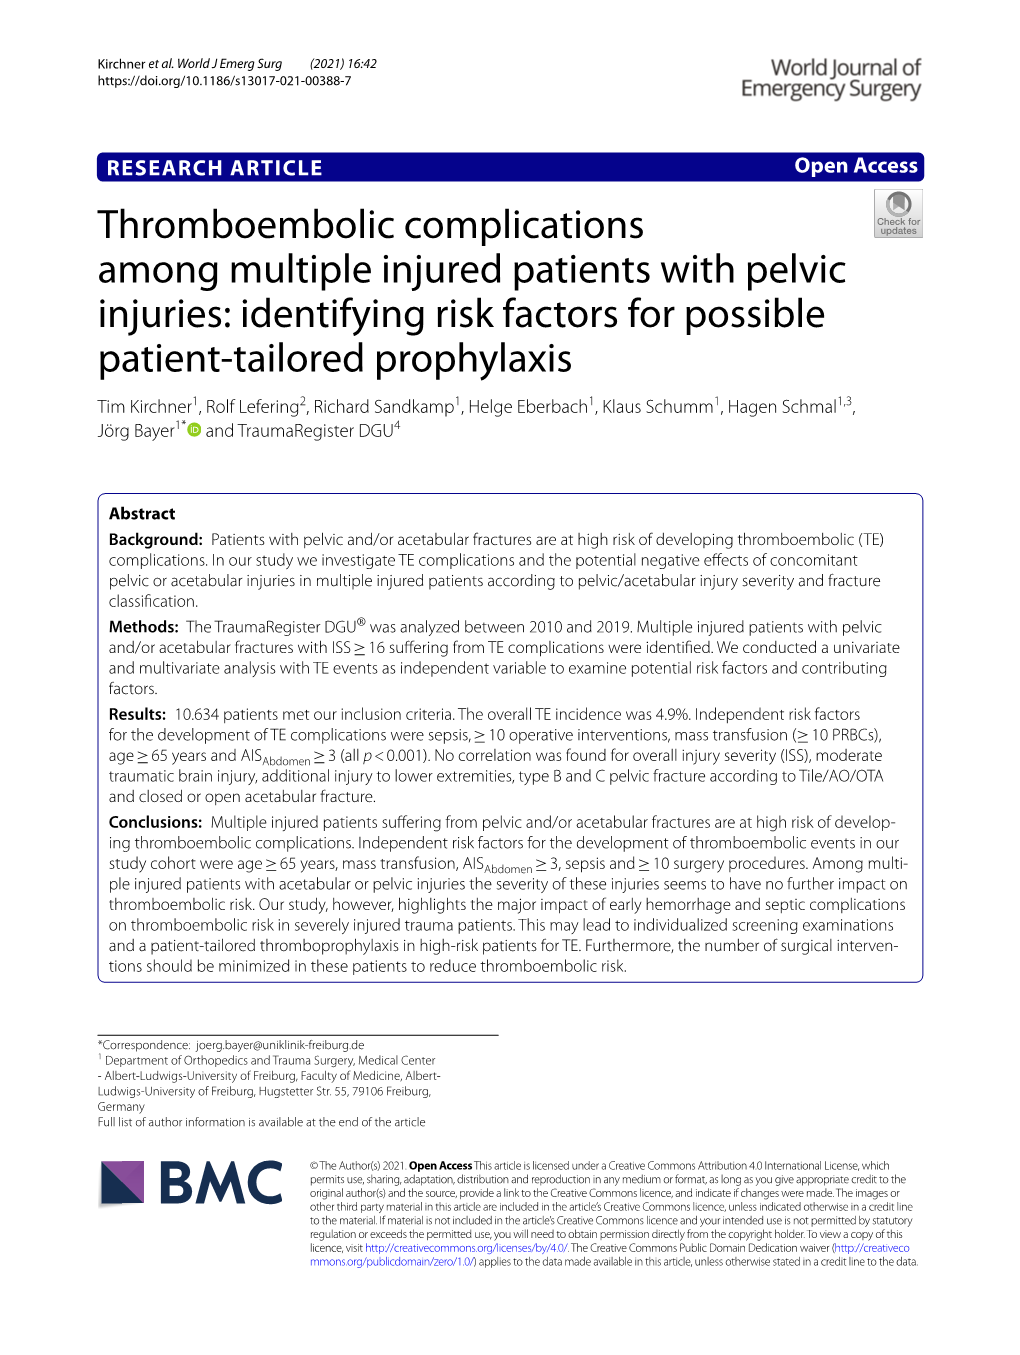 Thromboembolic Complications Among Multiple Injured Patients